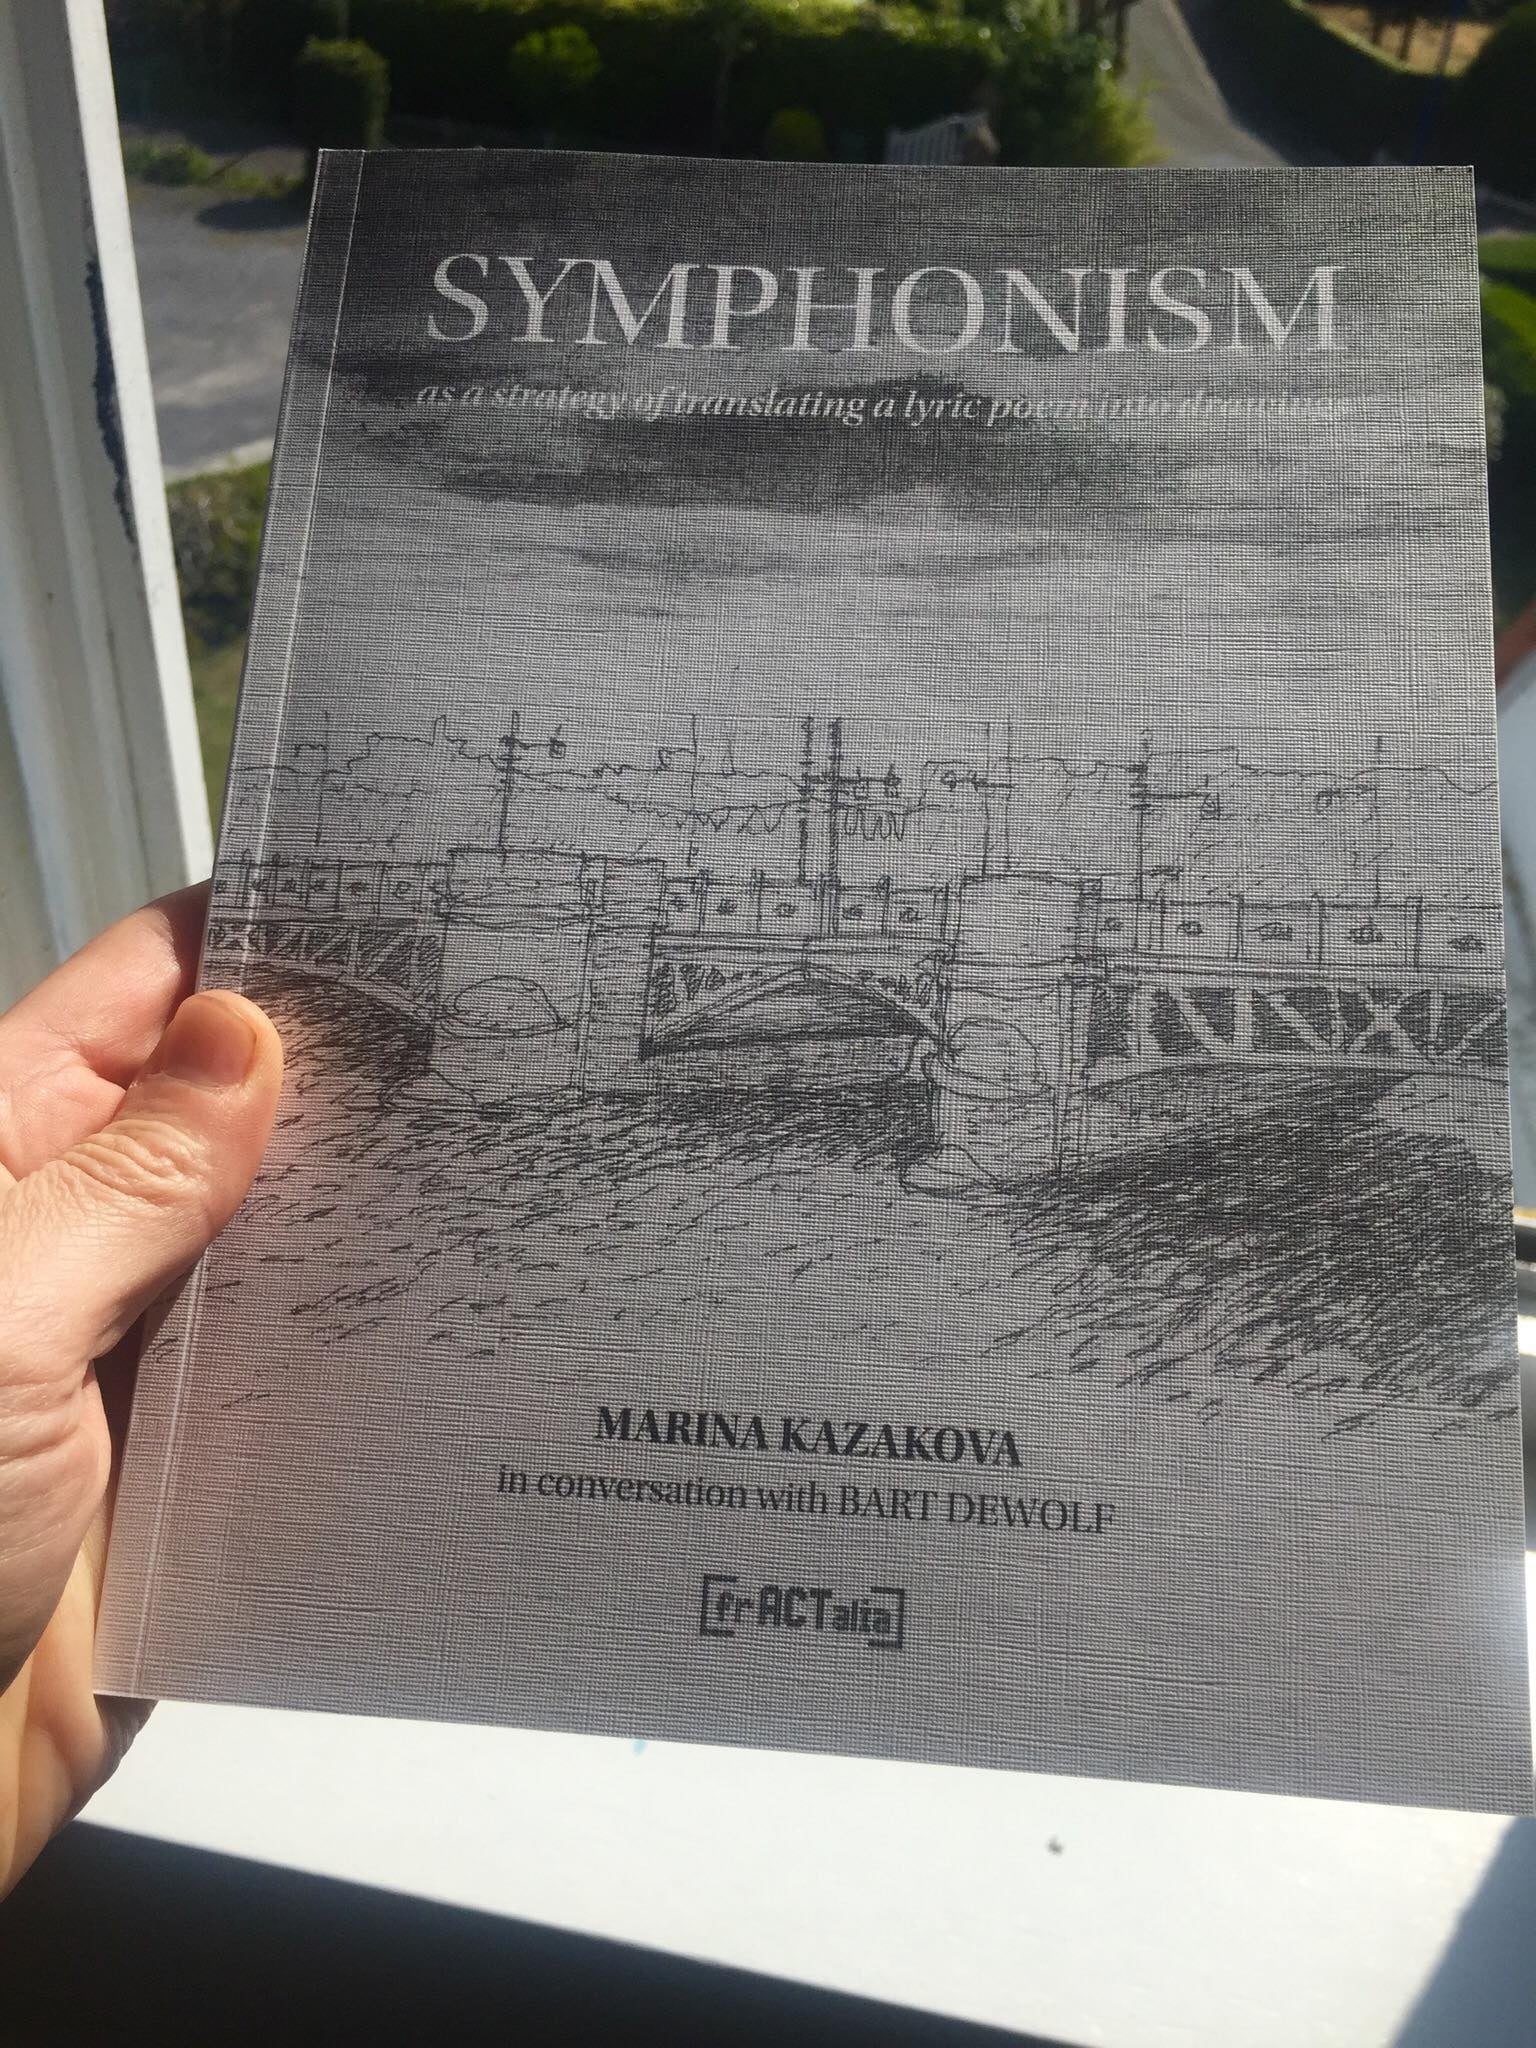 The book “Symphonism as a strategy of translating a lyric poem into drawings” is published by Fractalia Press